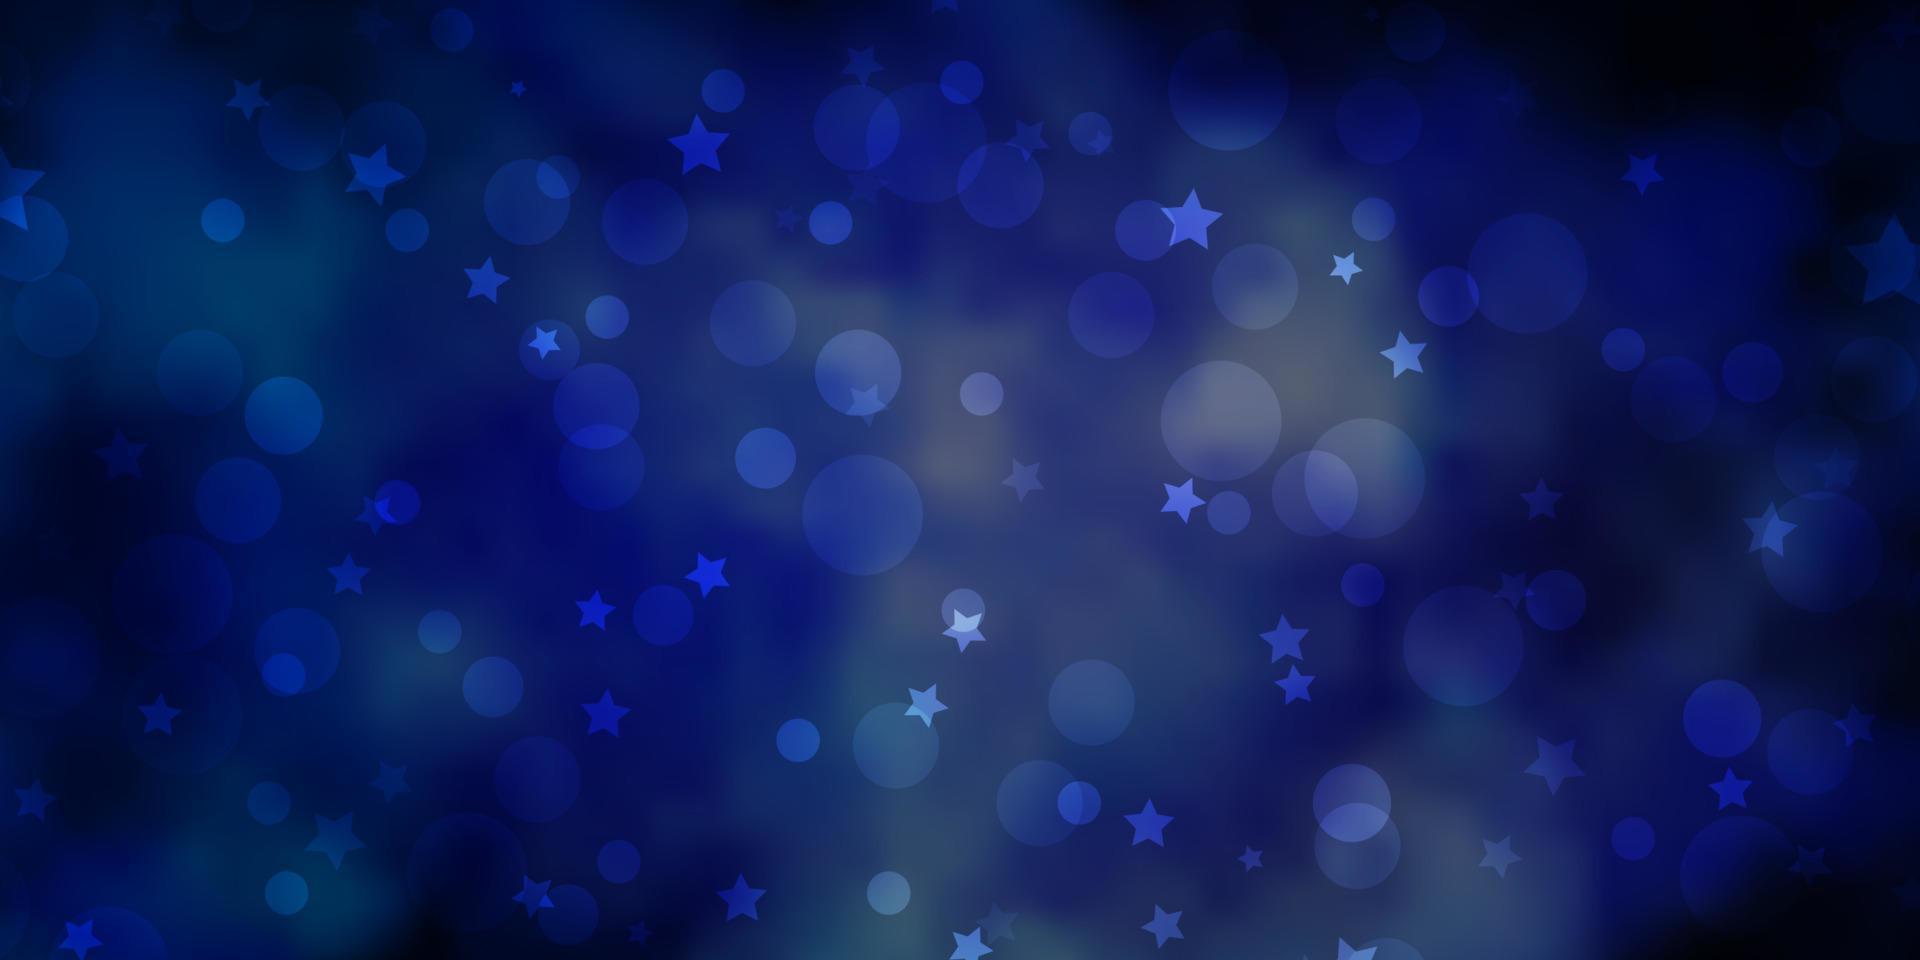 Dark Pink, Blue vector texture with circles, stars.